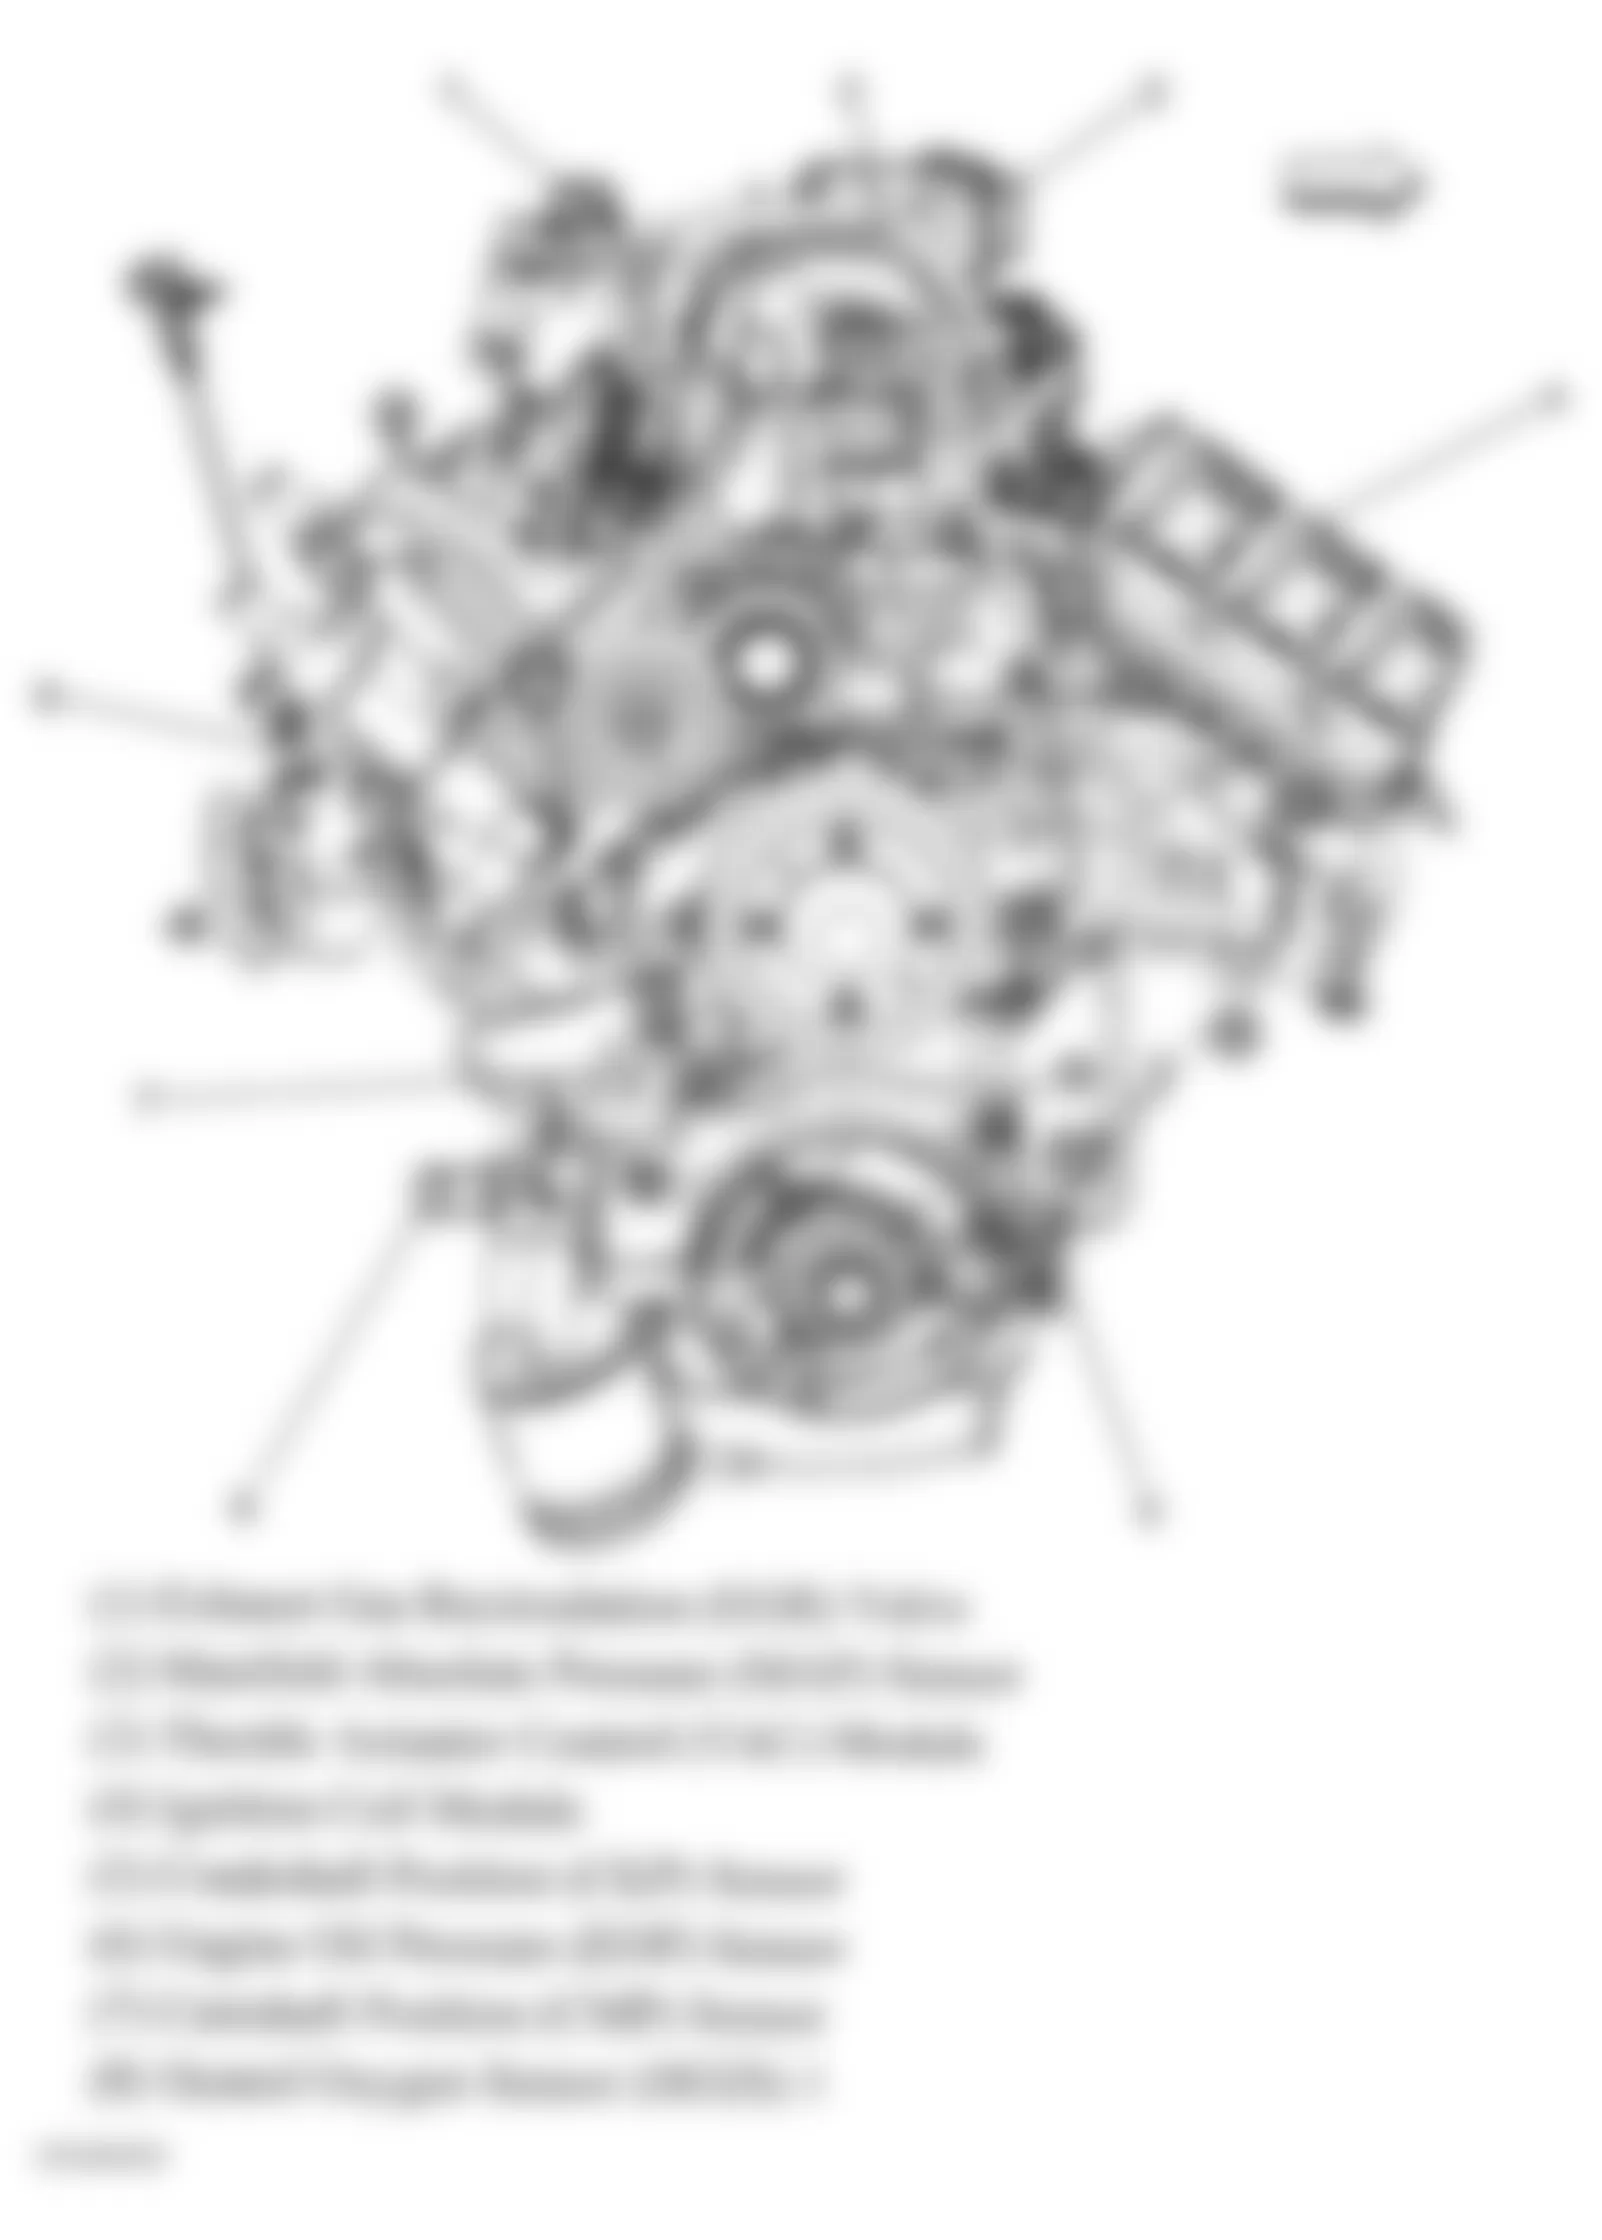 Buick LaCrosse CX 2008 - Component Locations -  Front Of Engine (3.8L)